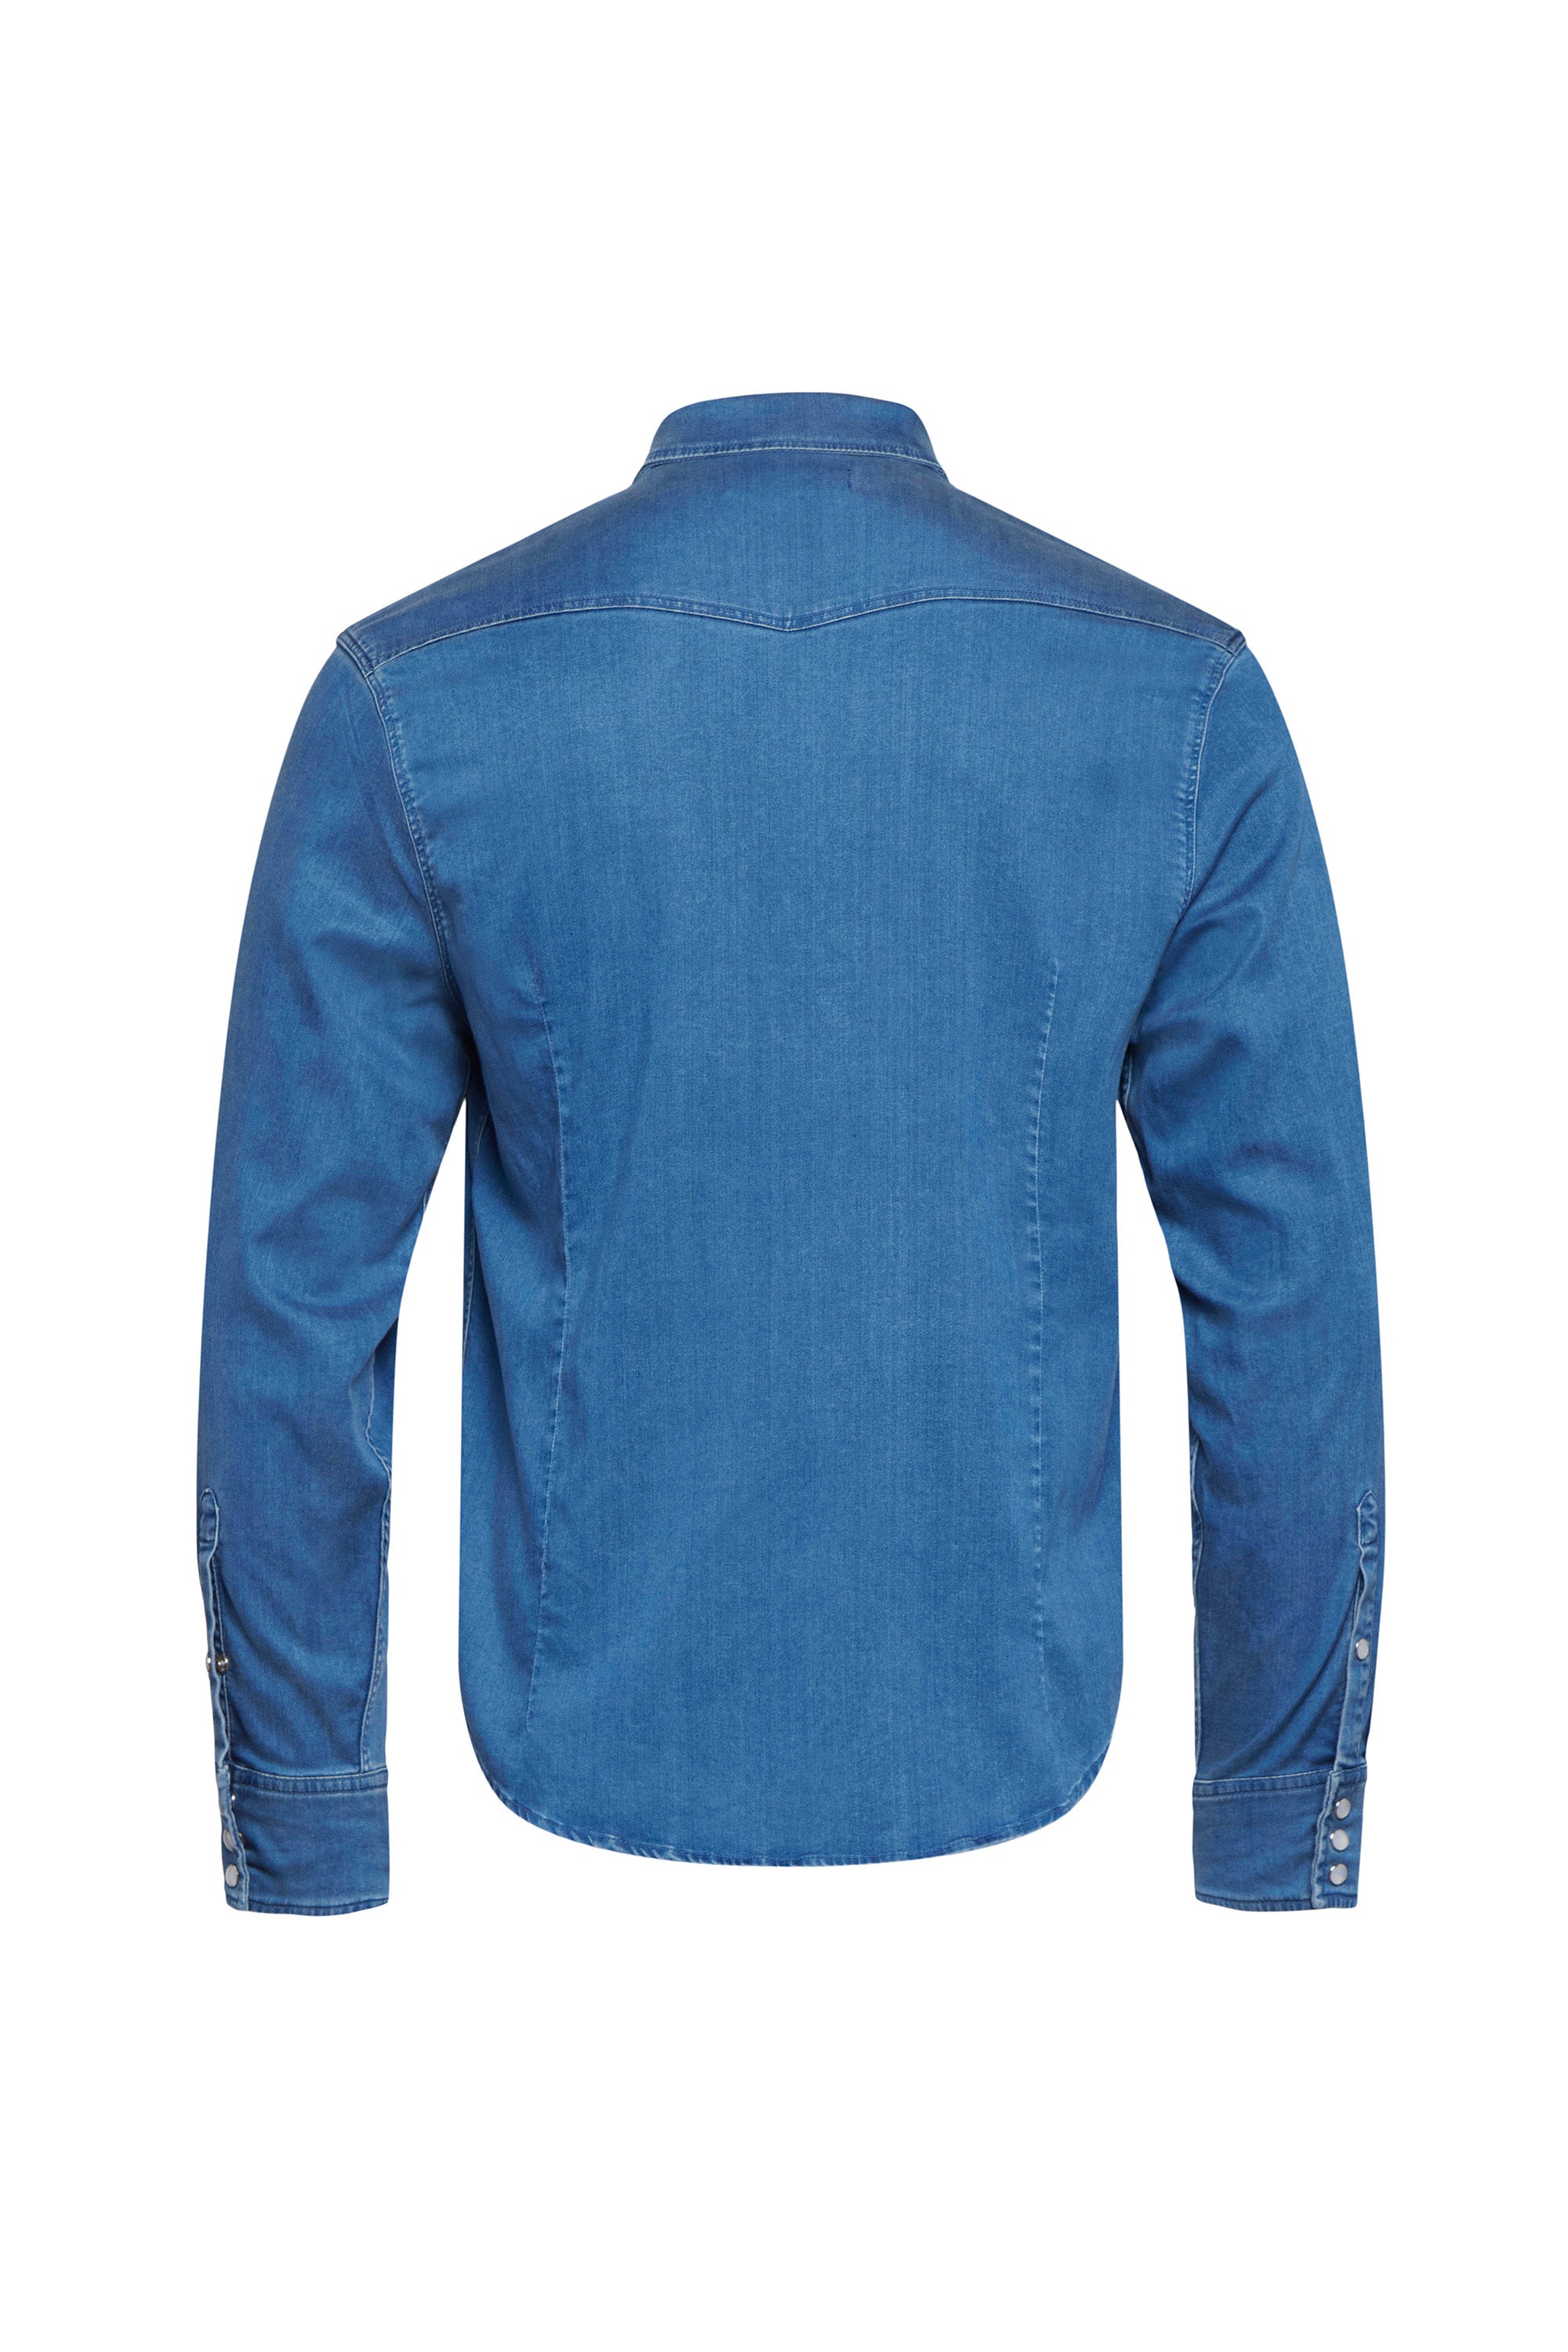 THE CLASSIC WESTERN LONG SLEEVE SHIRT - DELTA